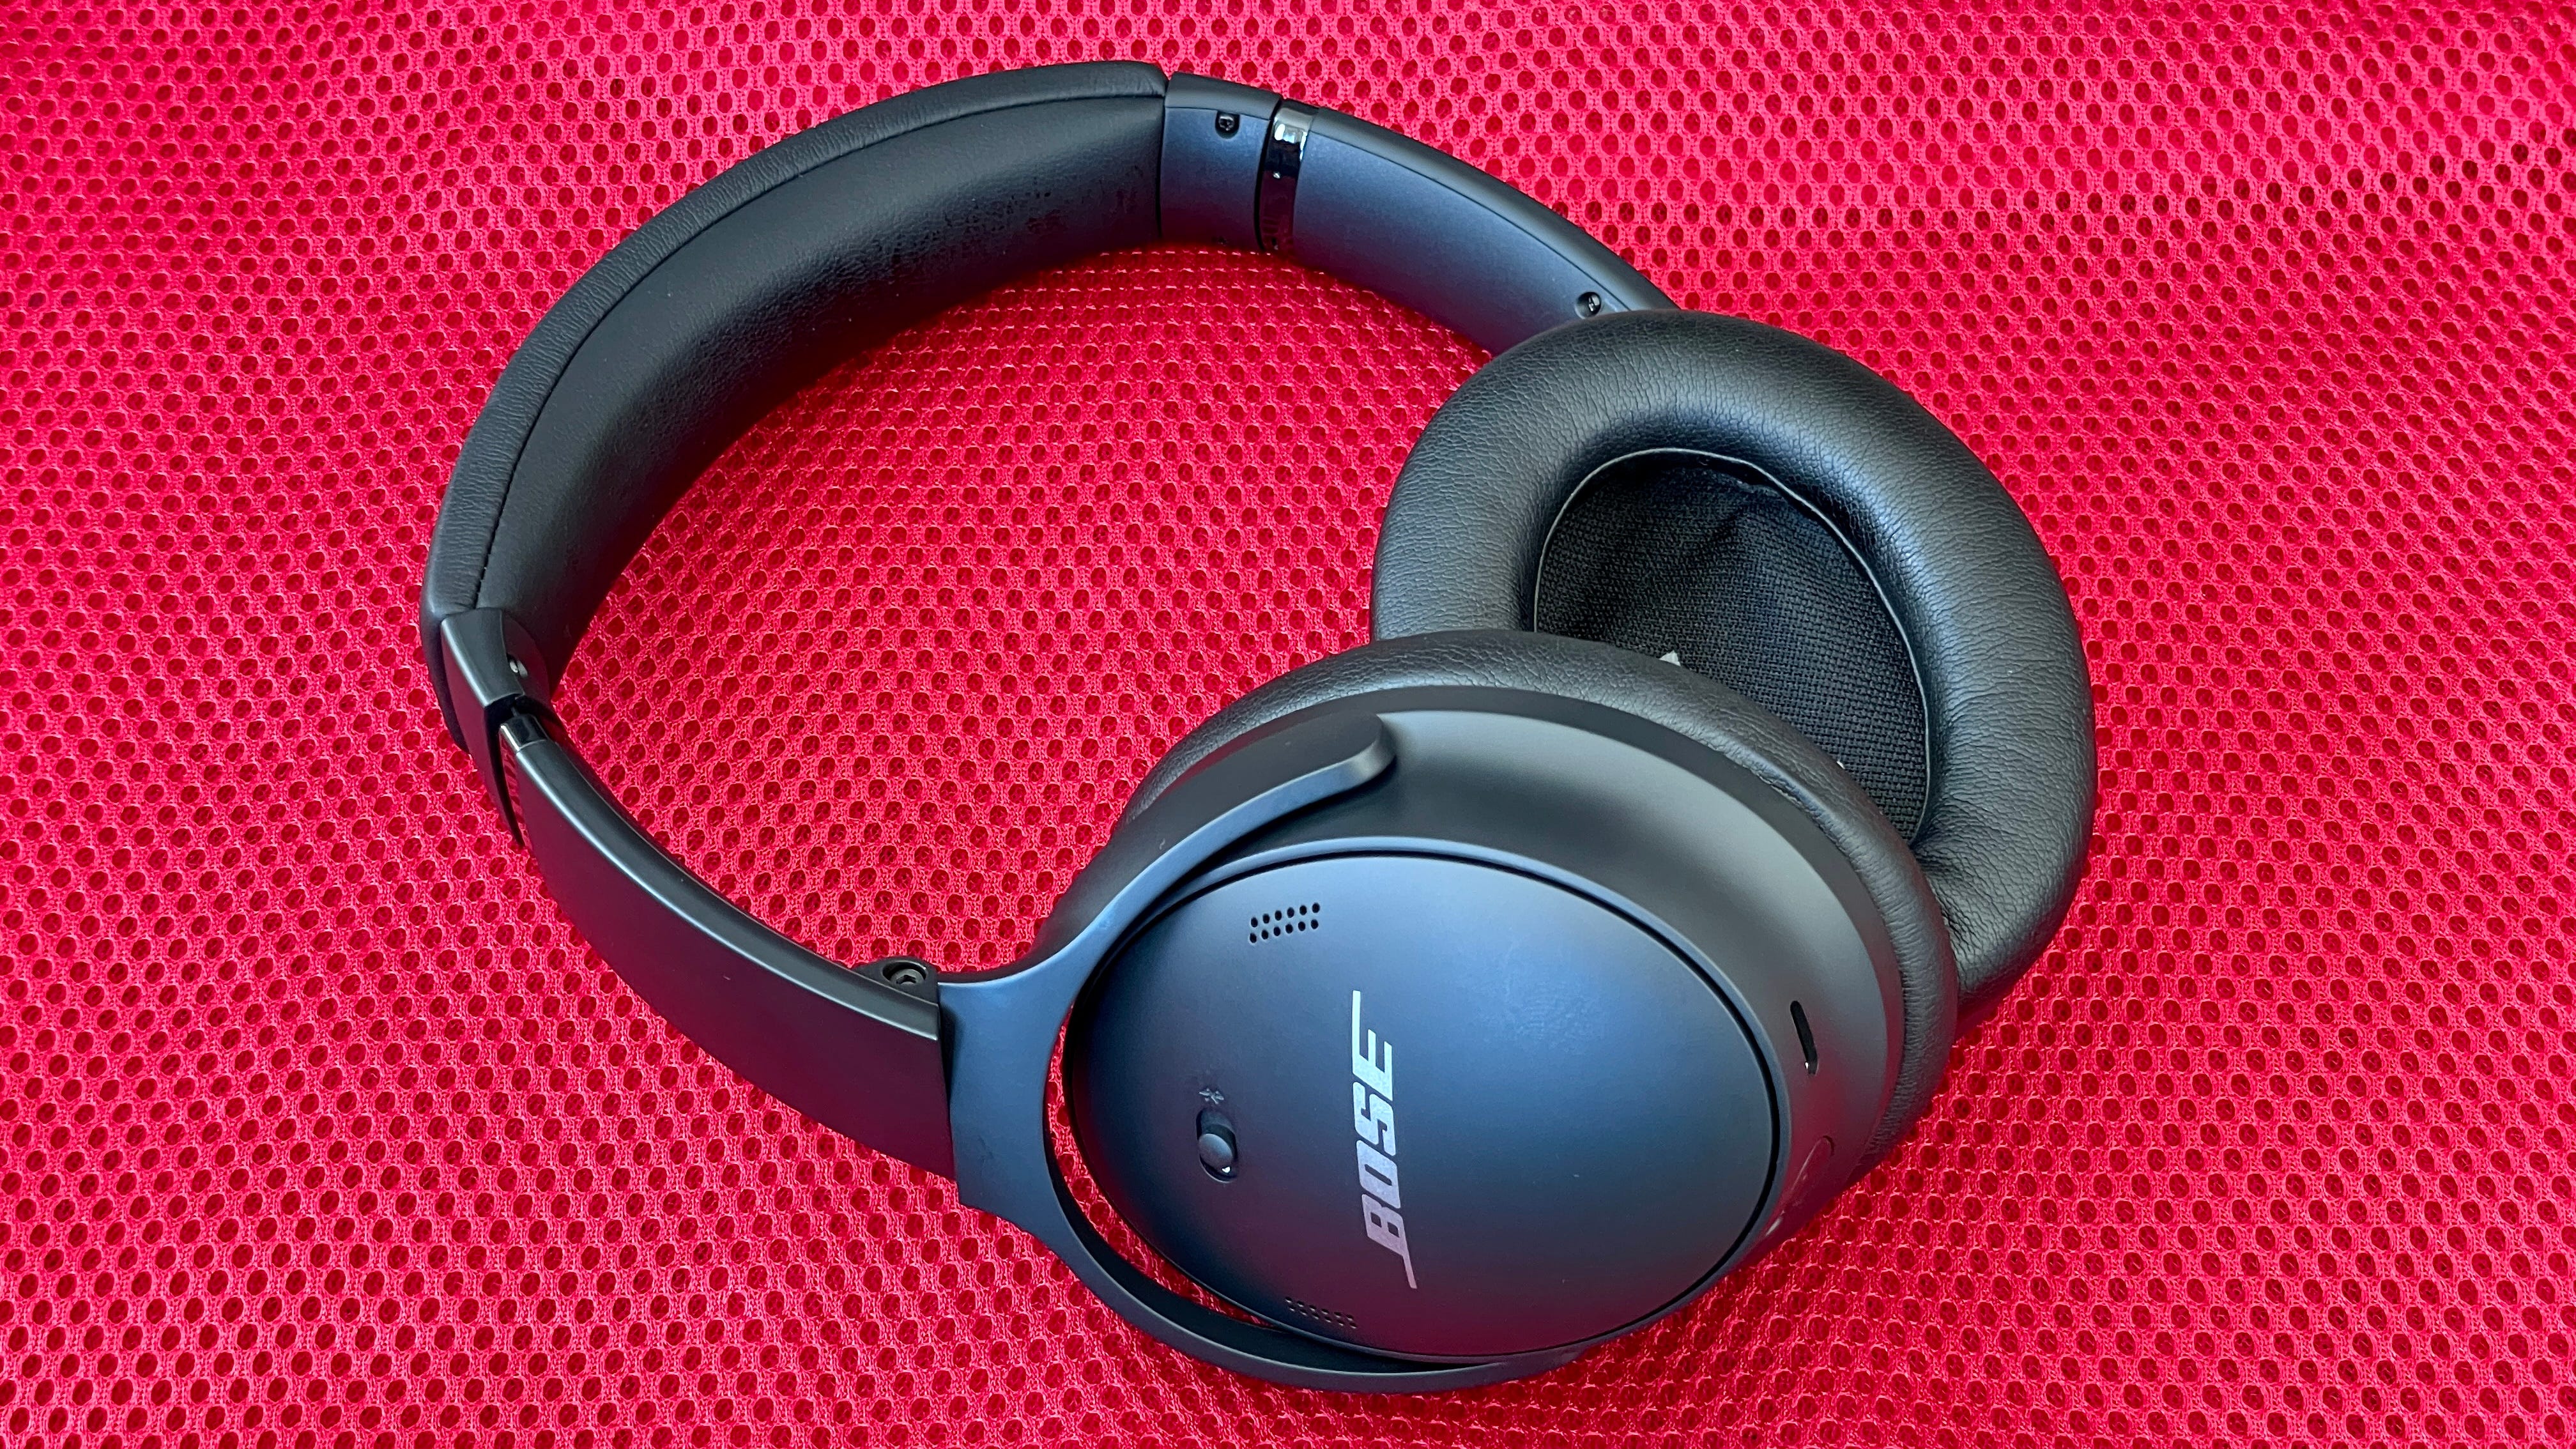 These Black Friday Bose Headphone Deals Sound Amazing, With Up to 40% Off -  CNET